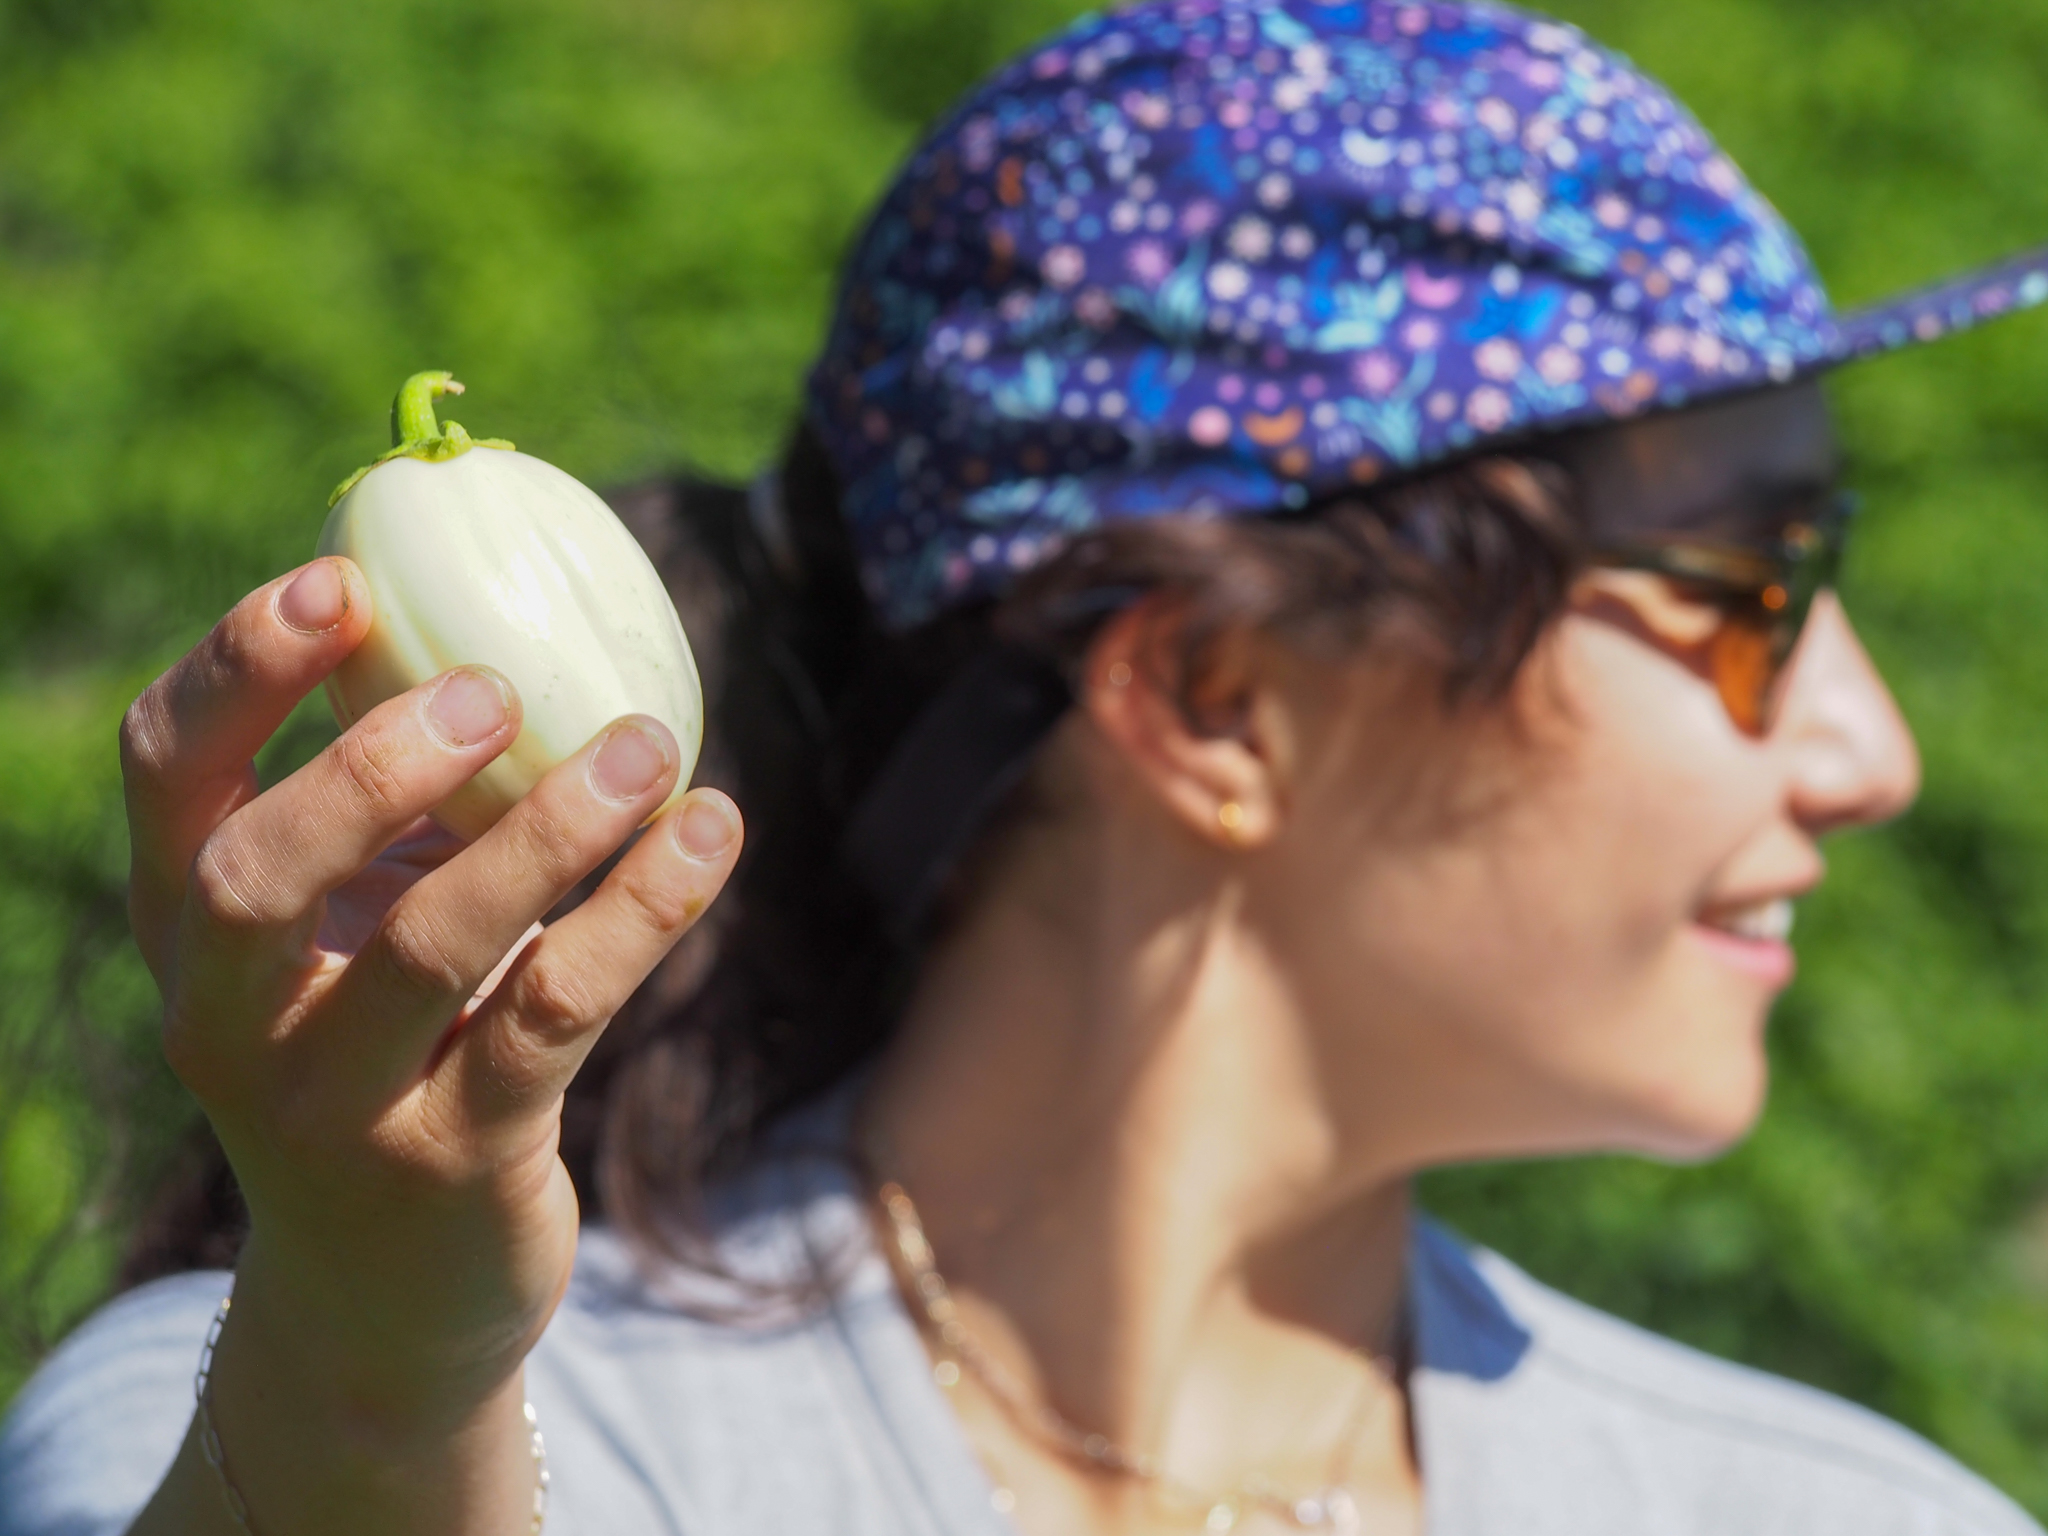 Sadie Bloch holds up a White African Eggplant harvested at Pine Island Community Farm in Colchester, VT.